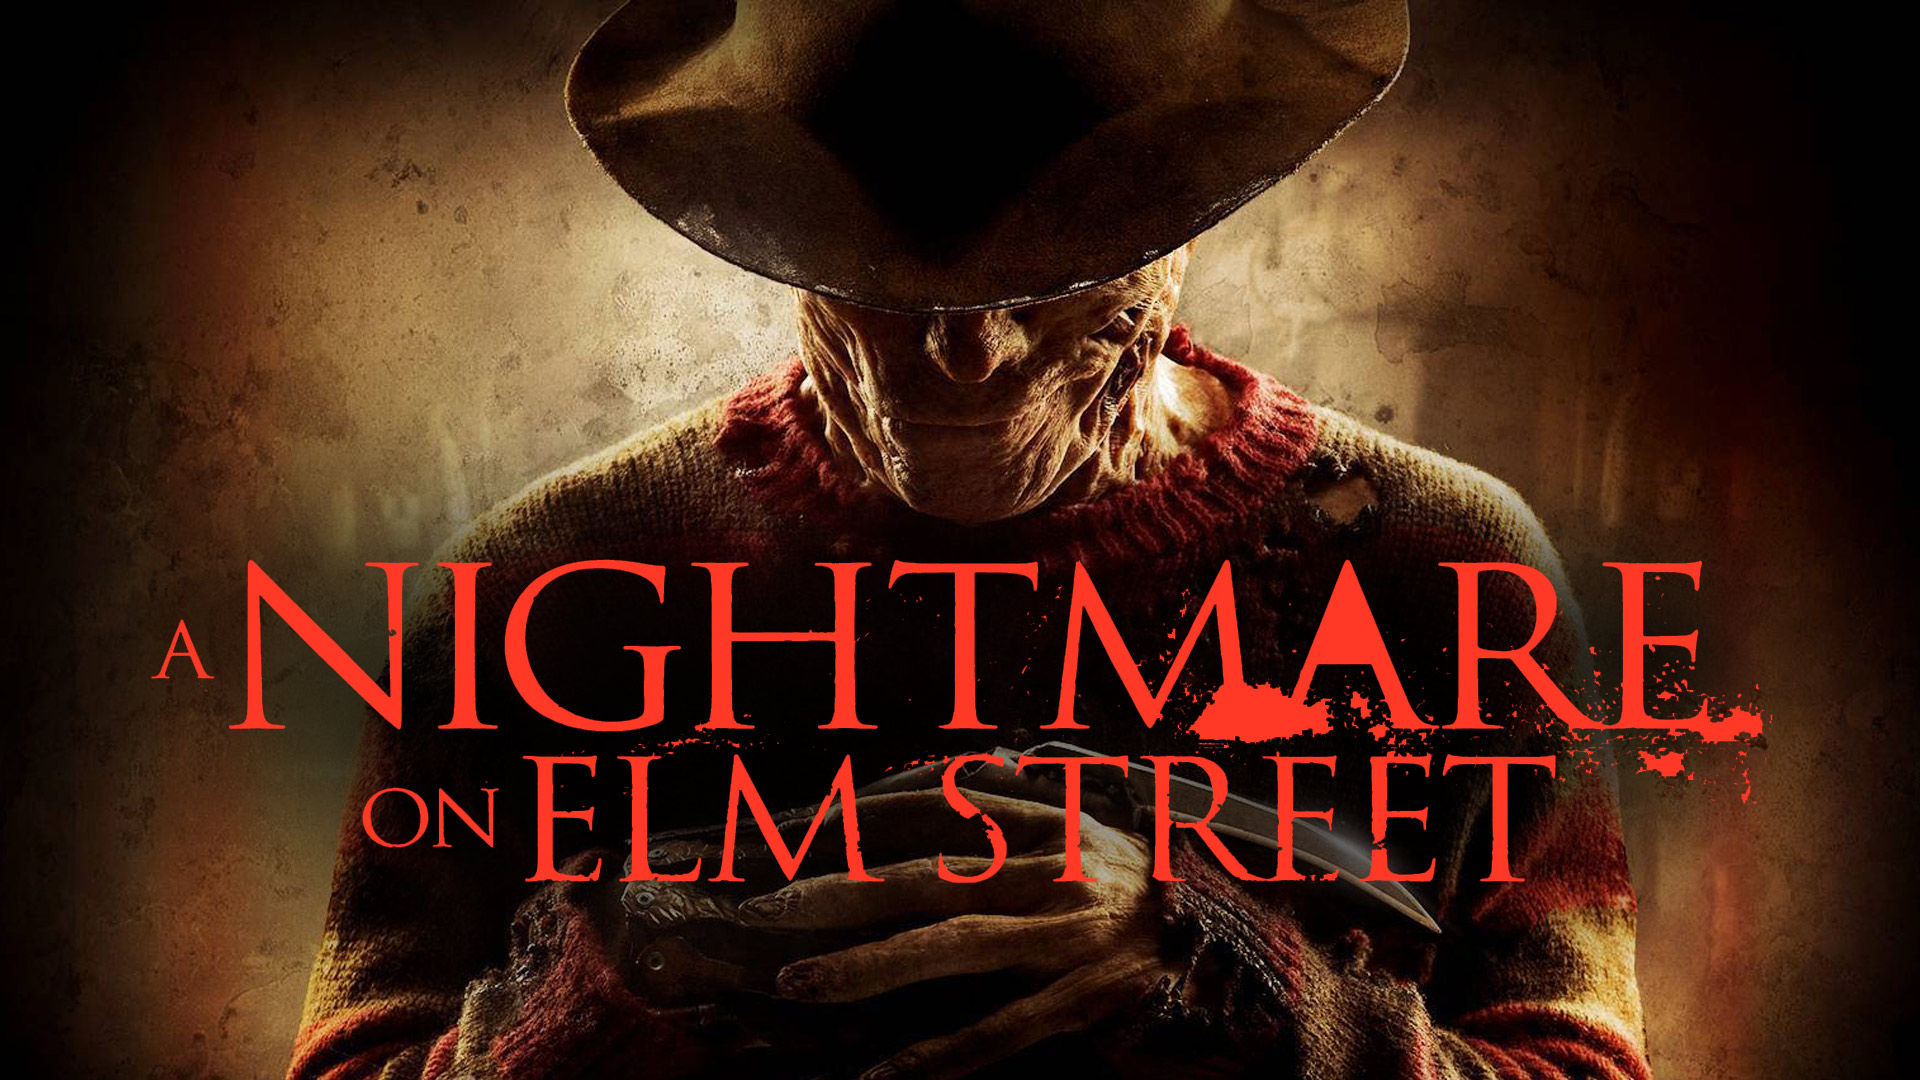 40-facts-about-the-movie-a-nightmare-on-elm-street